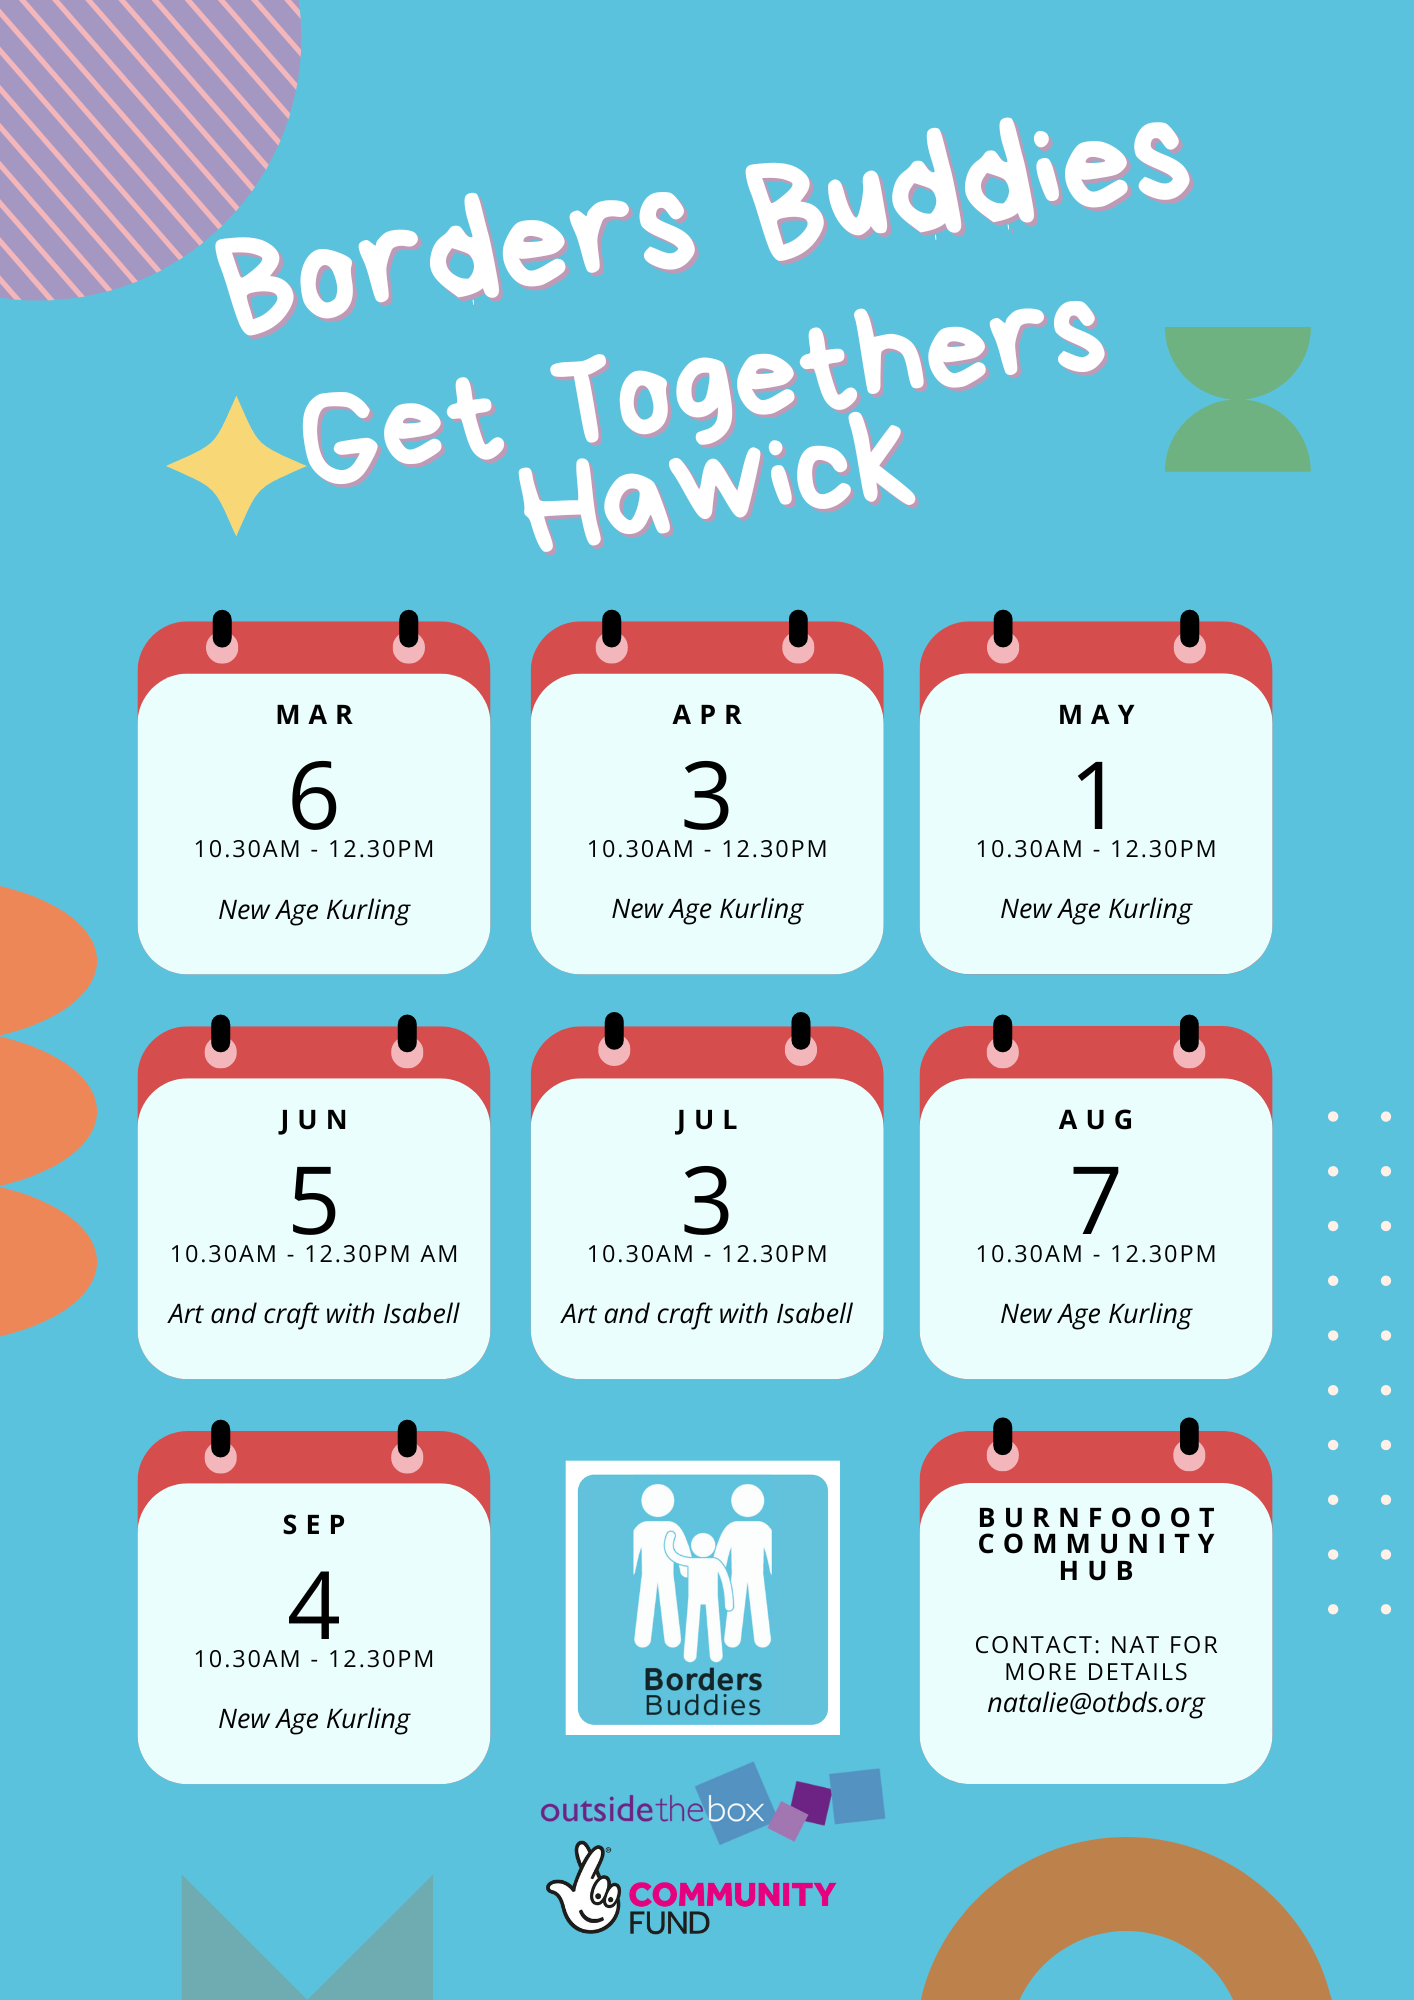 Borders Buddies Hawick Get together Poster